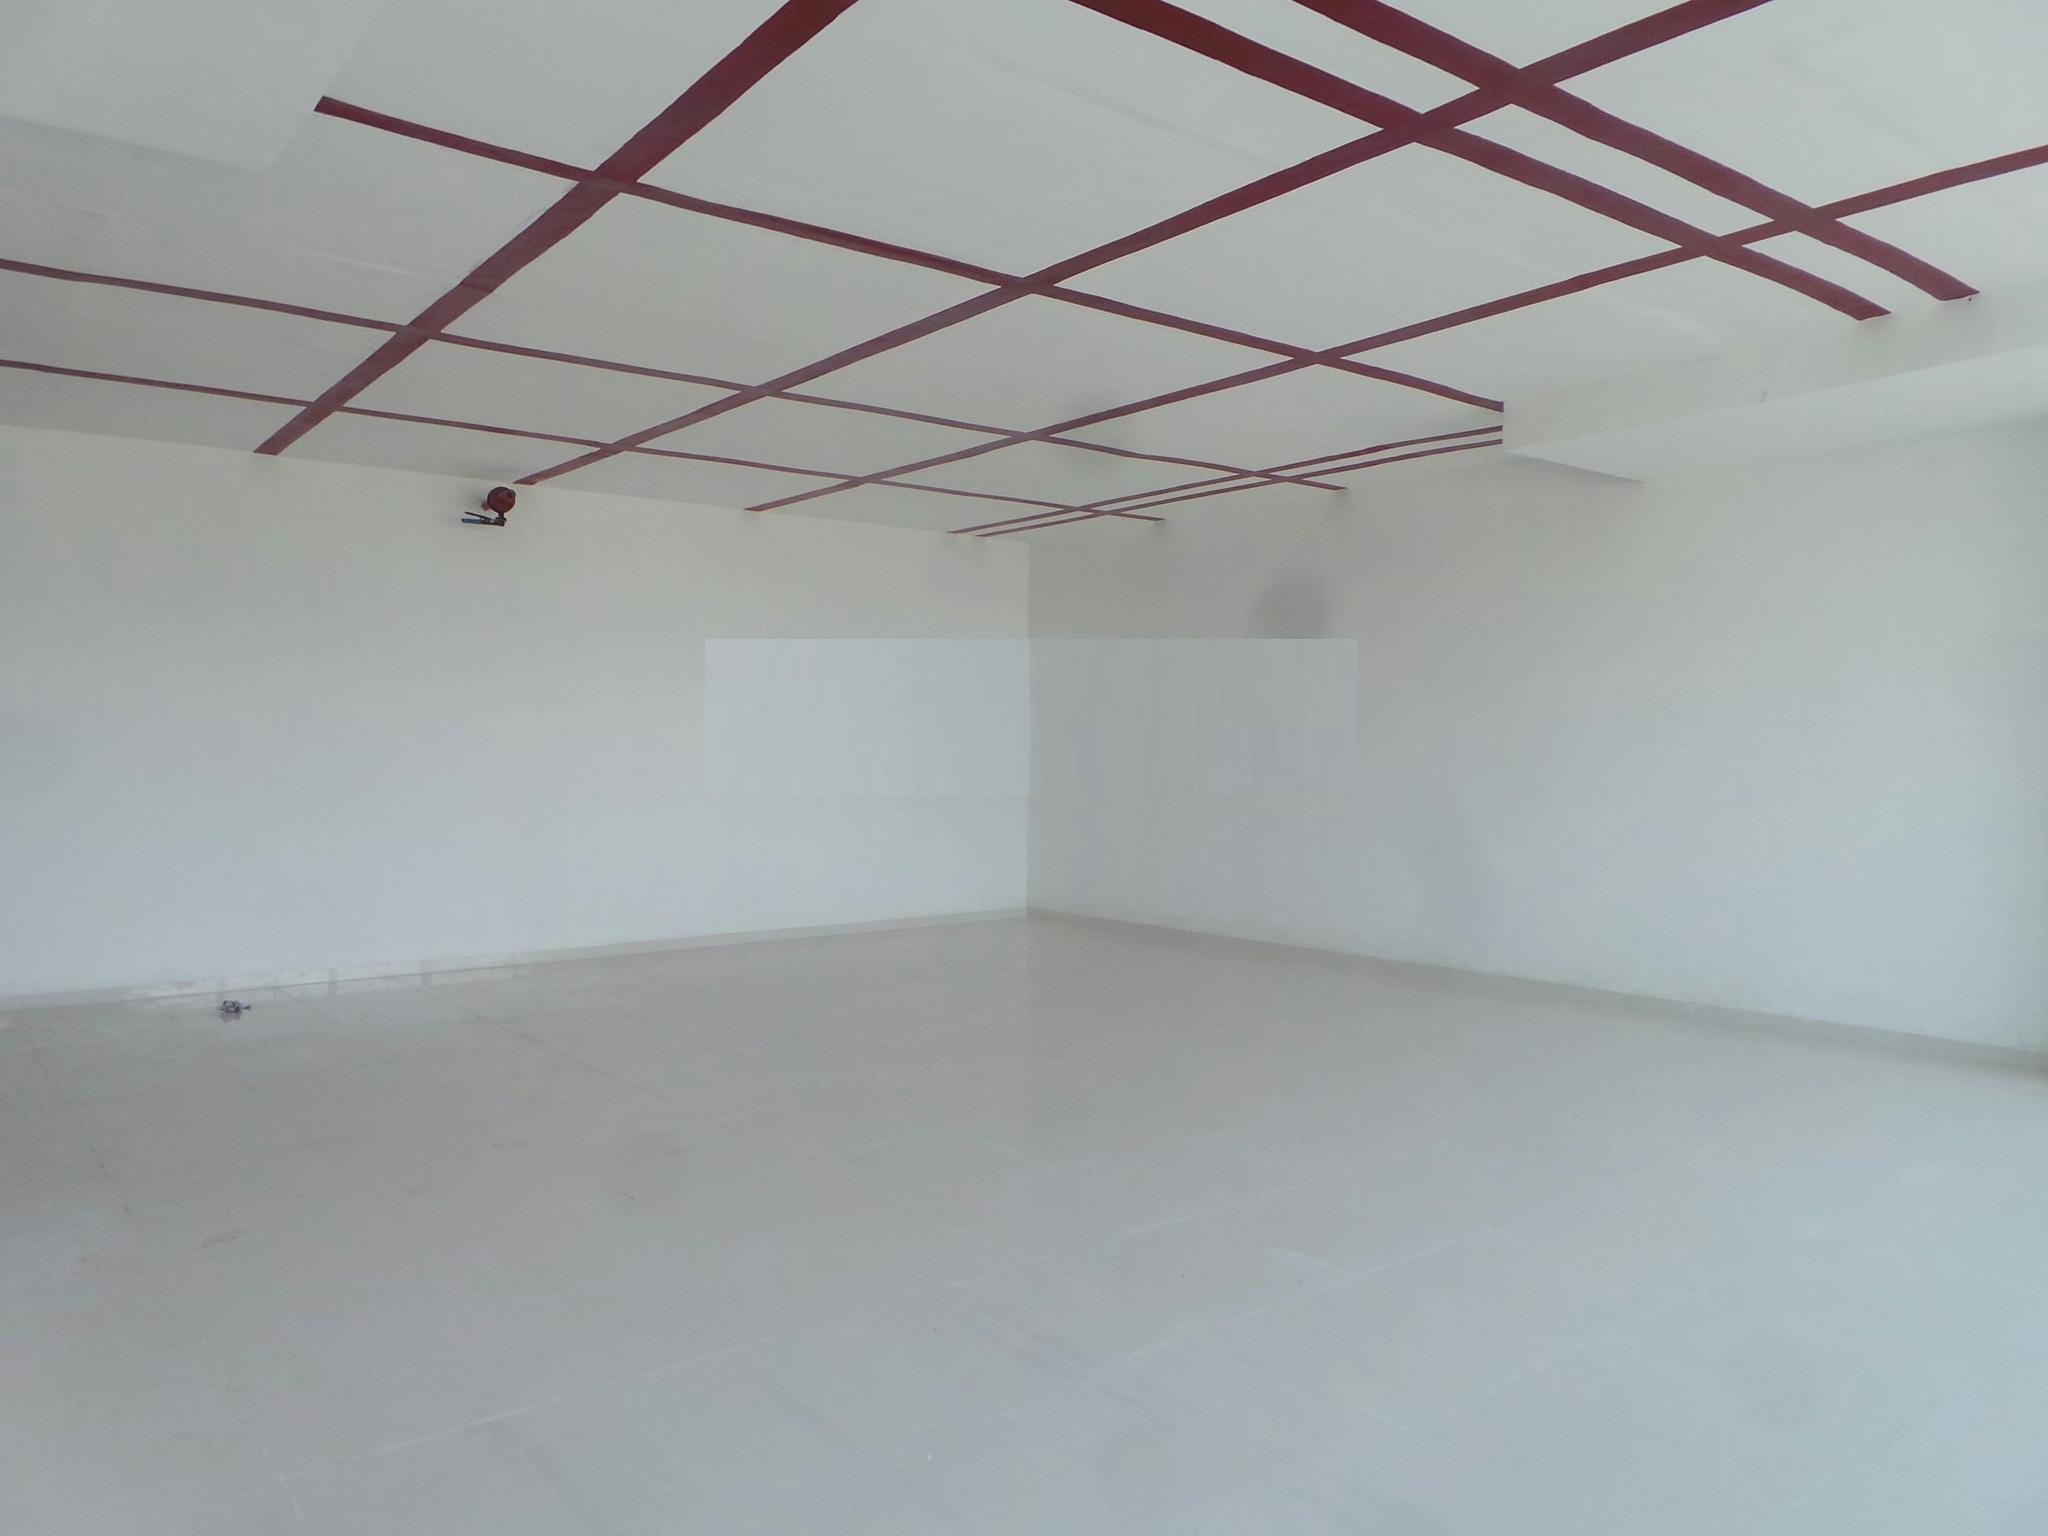 1295 Sq.Ft. UnFurnished Office/Space @ 89.99 Th for Rent/Lease in Baner, 